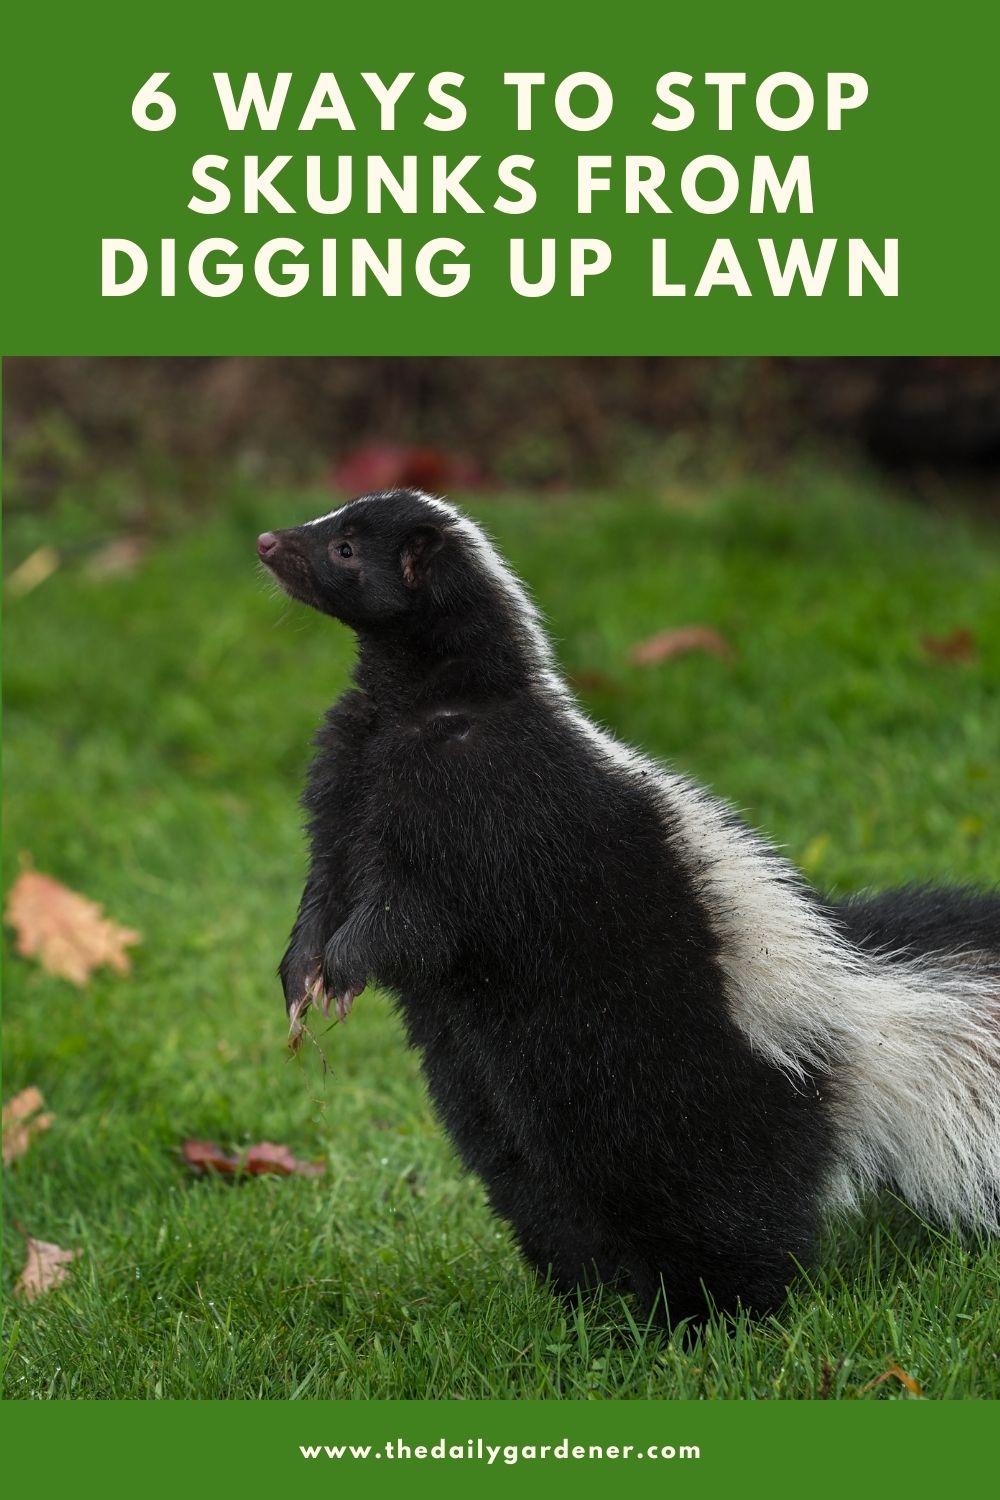 6 Ways to Stop Skunks from Digging Up Lawn